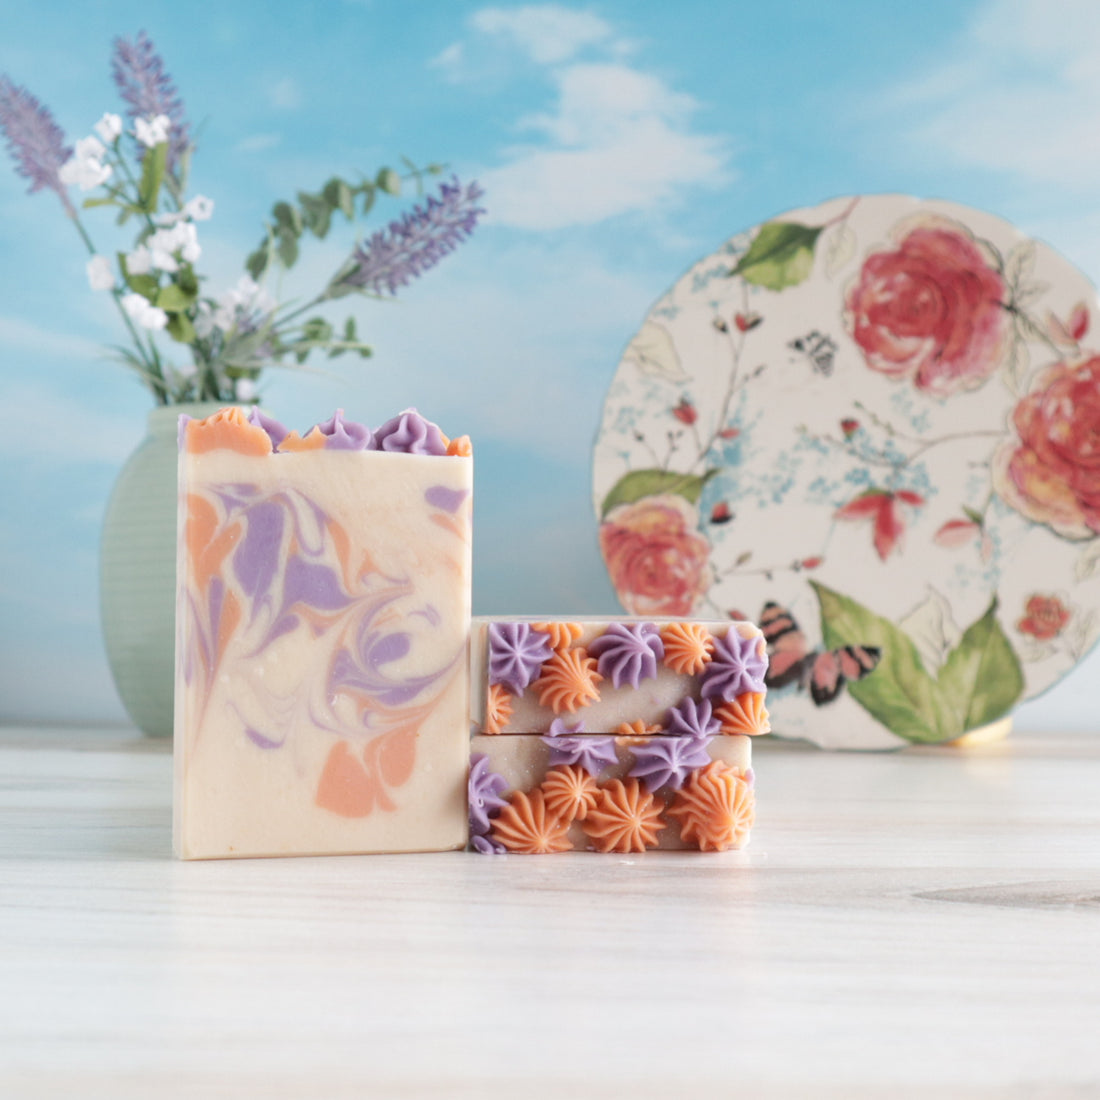 2 lavender apricot soaps are laying flat, stacked to show the pretty piping on top. there is a third one standing tall to show the muted colors of orange and purple in the creamy base color of the soap. It invokes a soothing vibe that is perfect pairing for the scent. there is a floral plate in the background standing of end to show the top and there is a vase of green with lavender buds in the back left of the image.